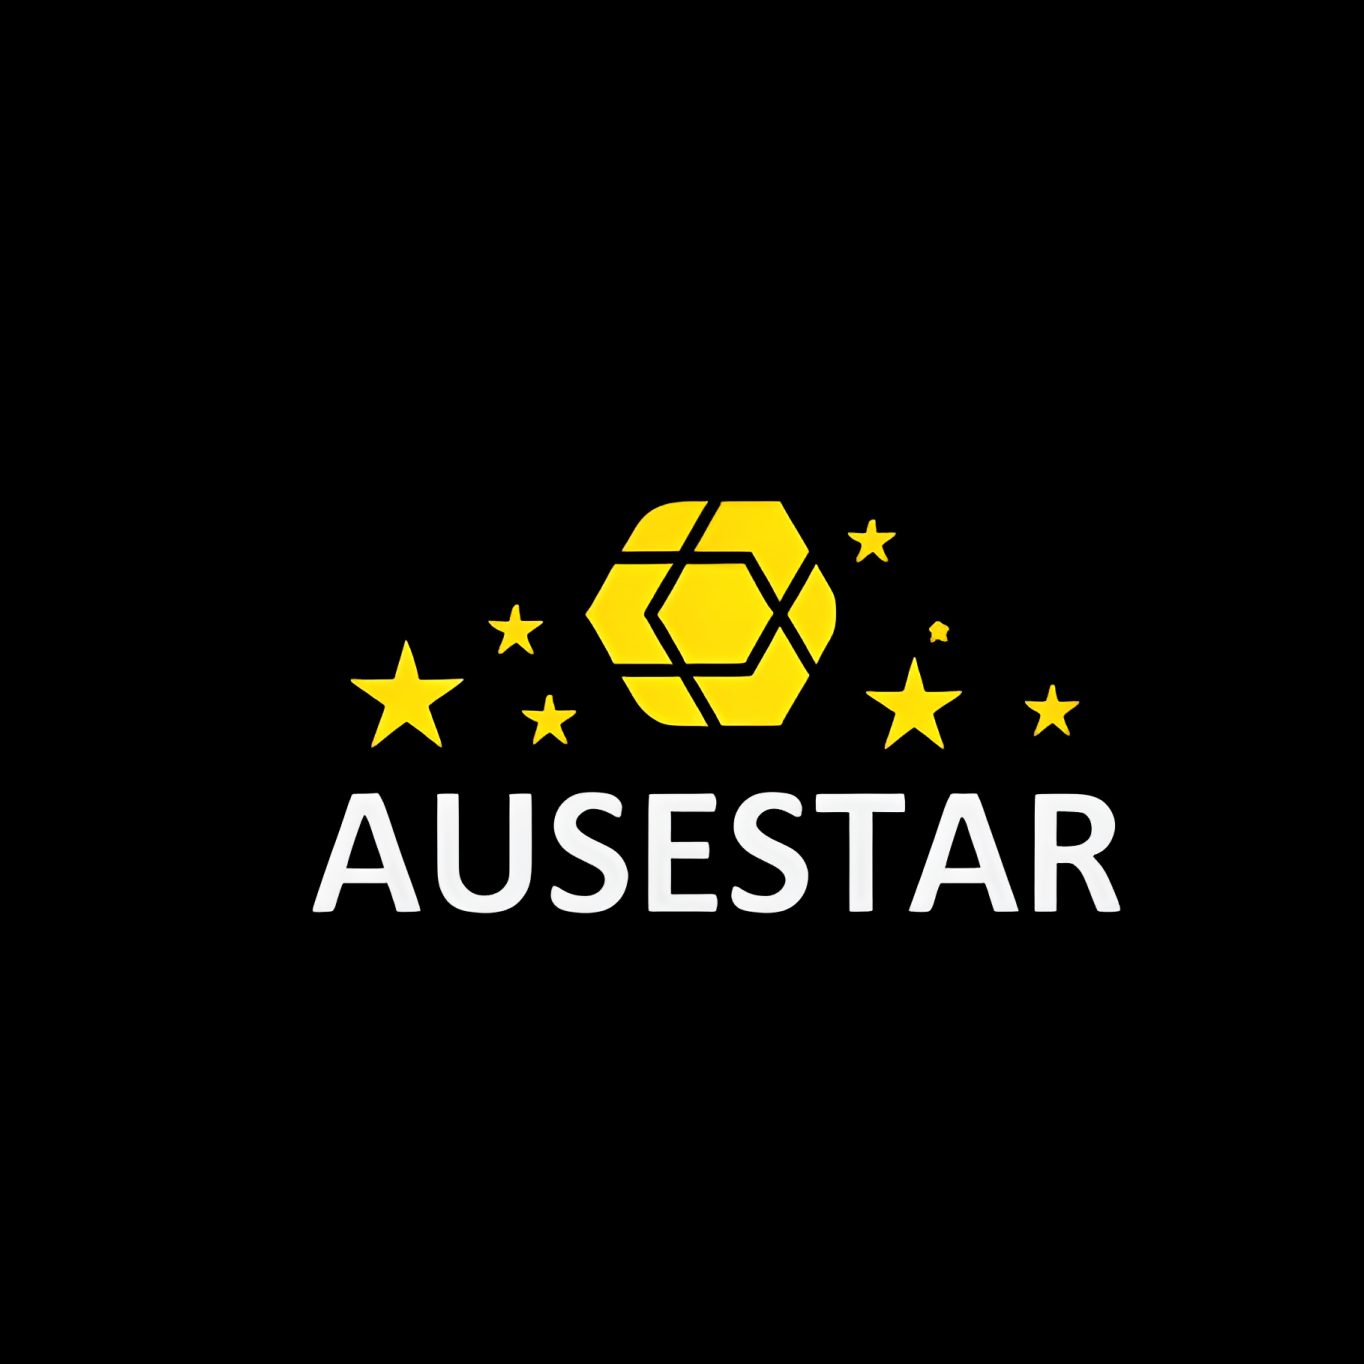 AUSESTAR OÜ - Agents involved in the sale of a variety of goods in Tallinn